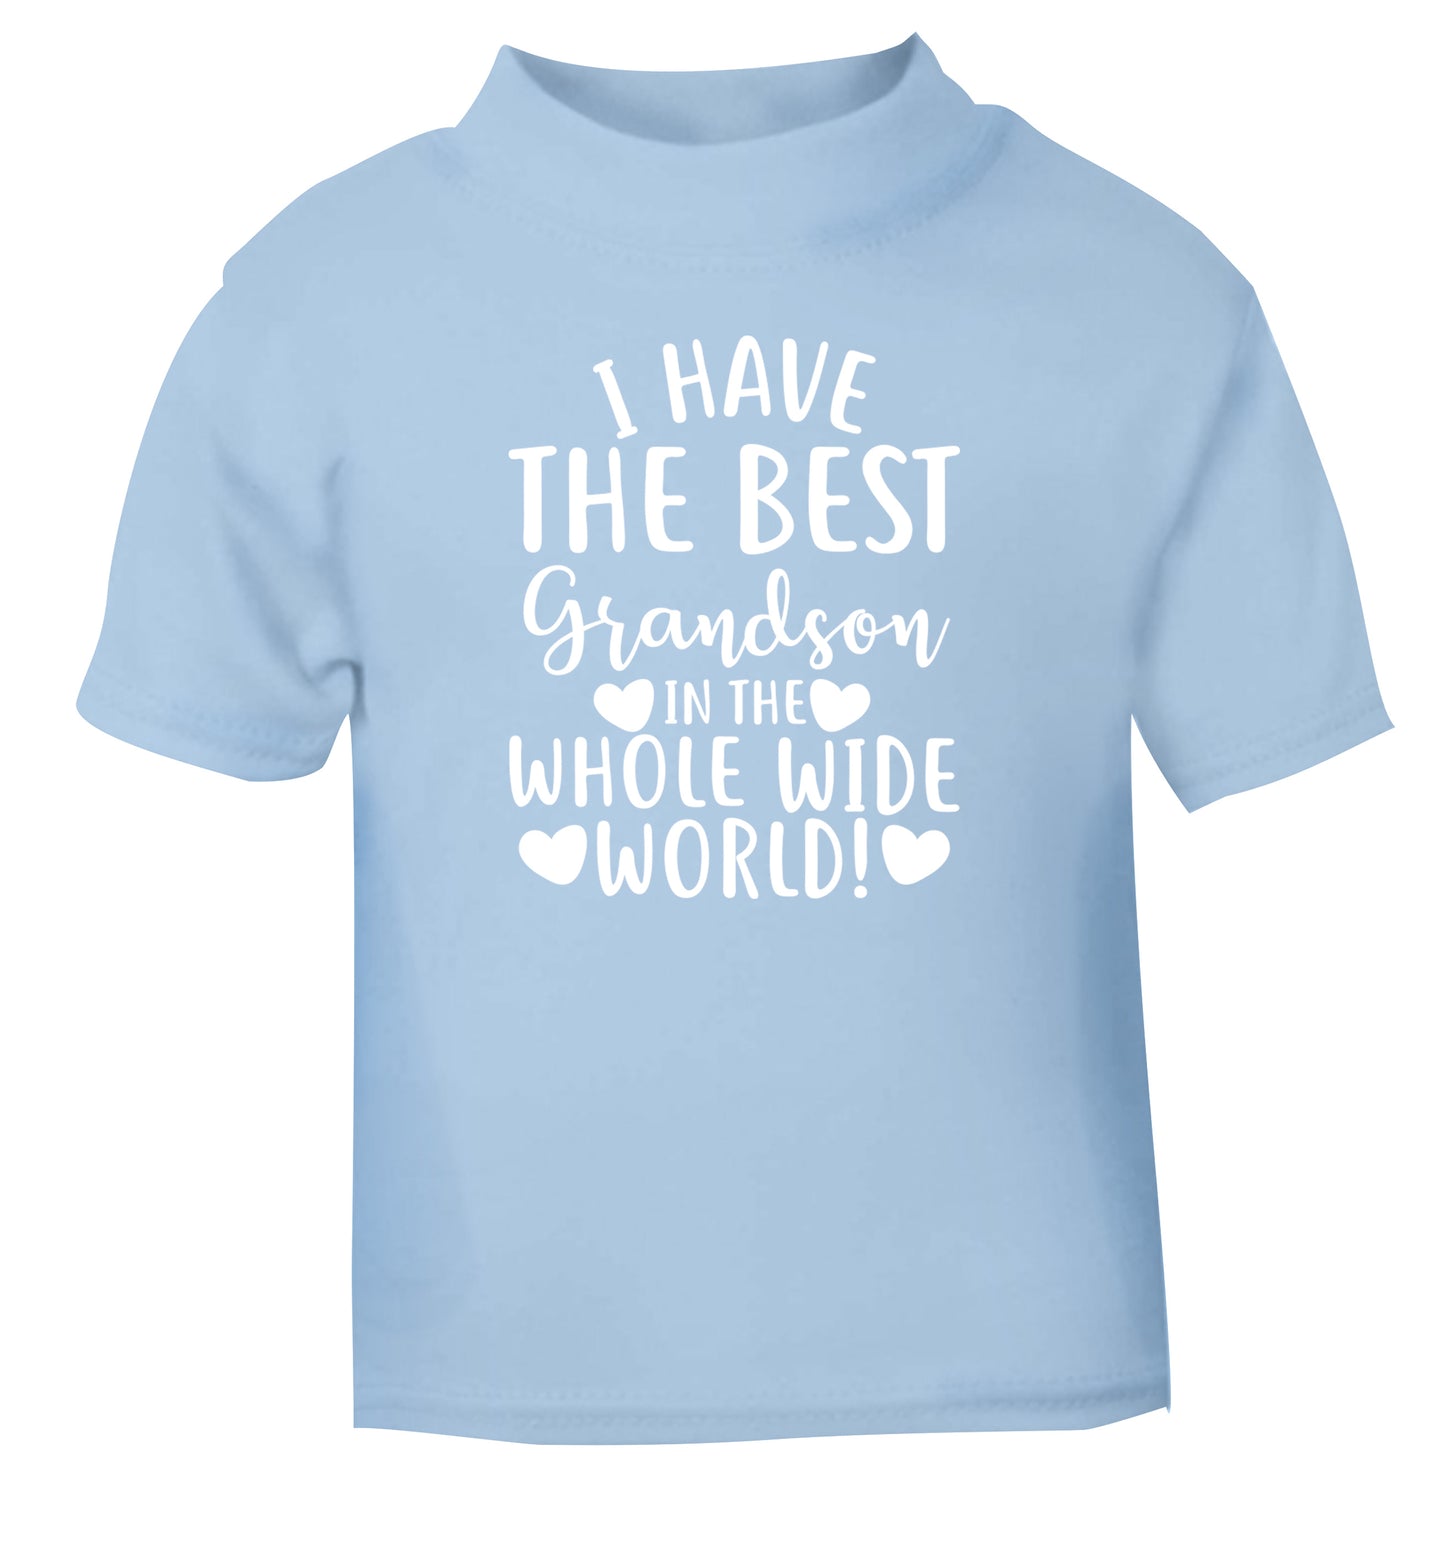 I have the best grandson in the whole wide world! light blue Baby Toddler Tshirt 2 Years